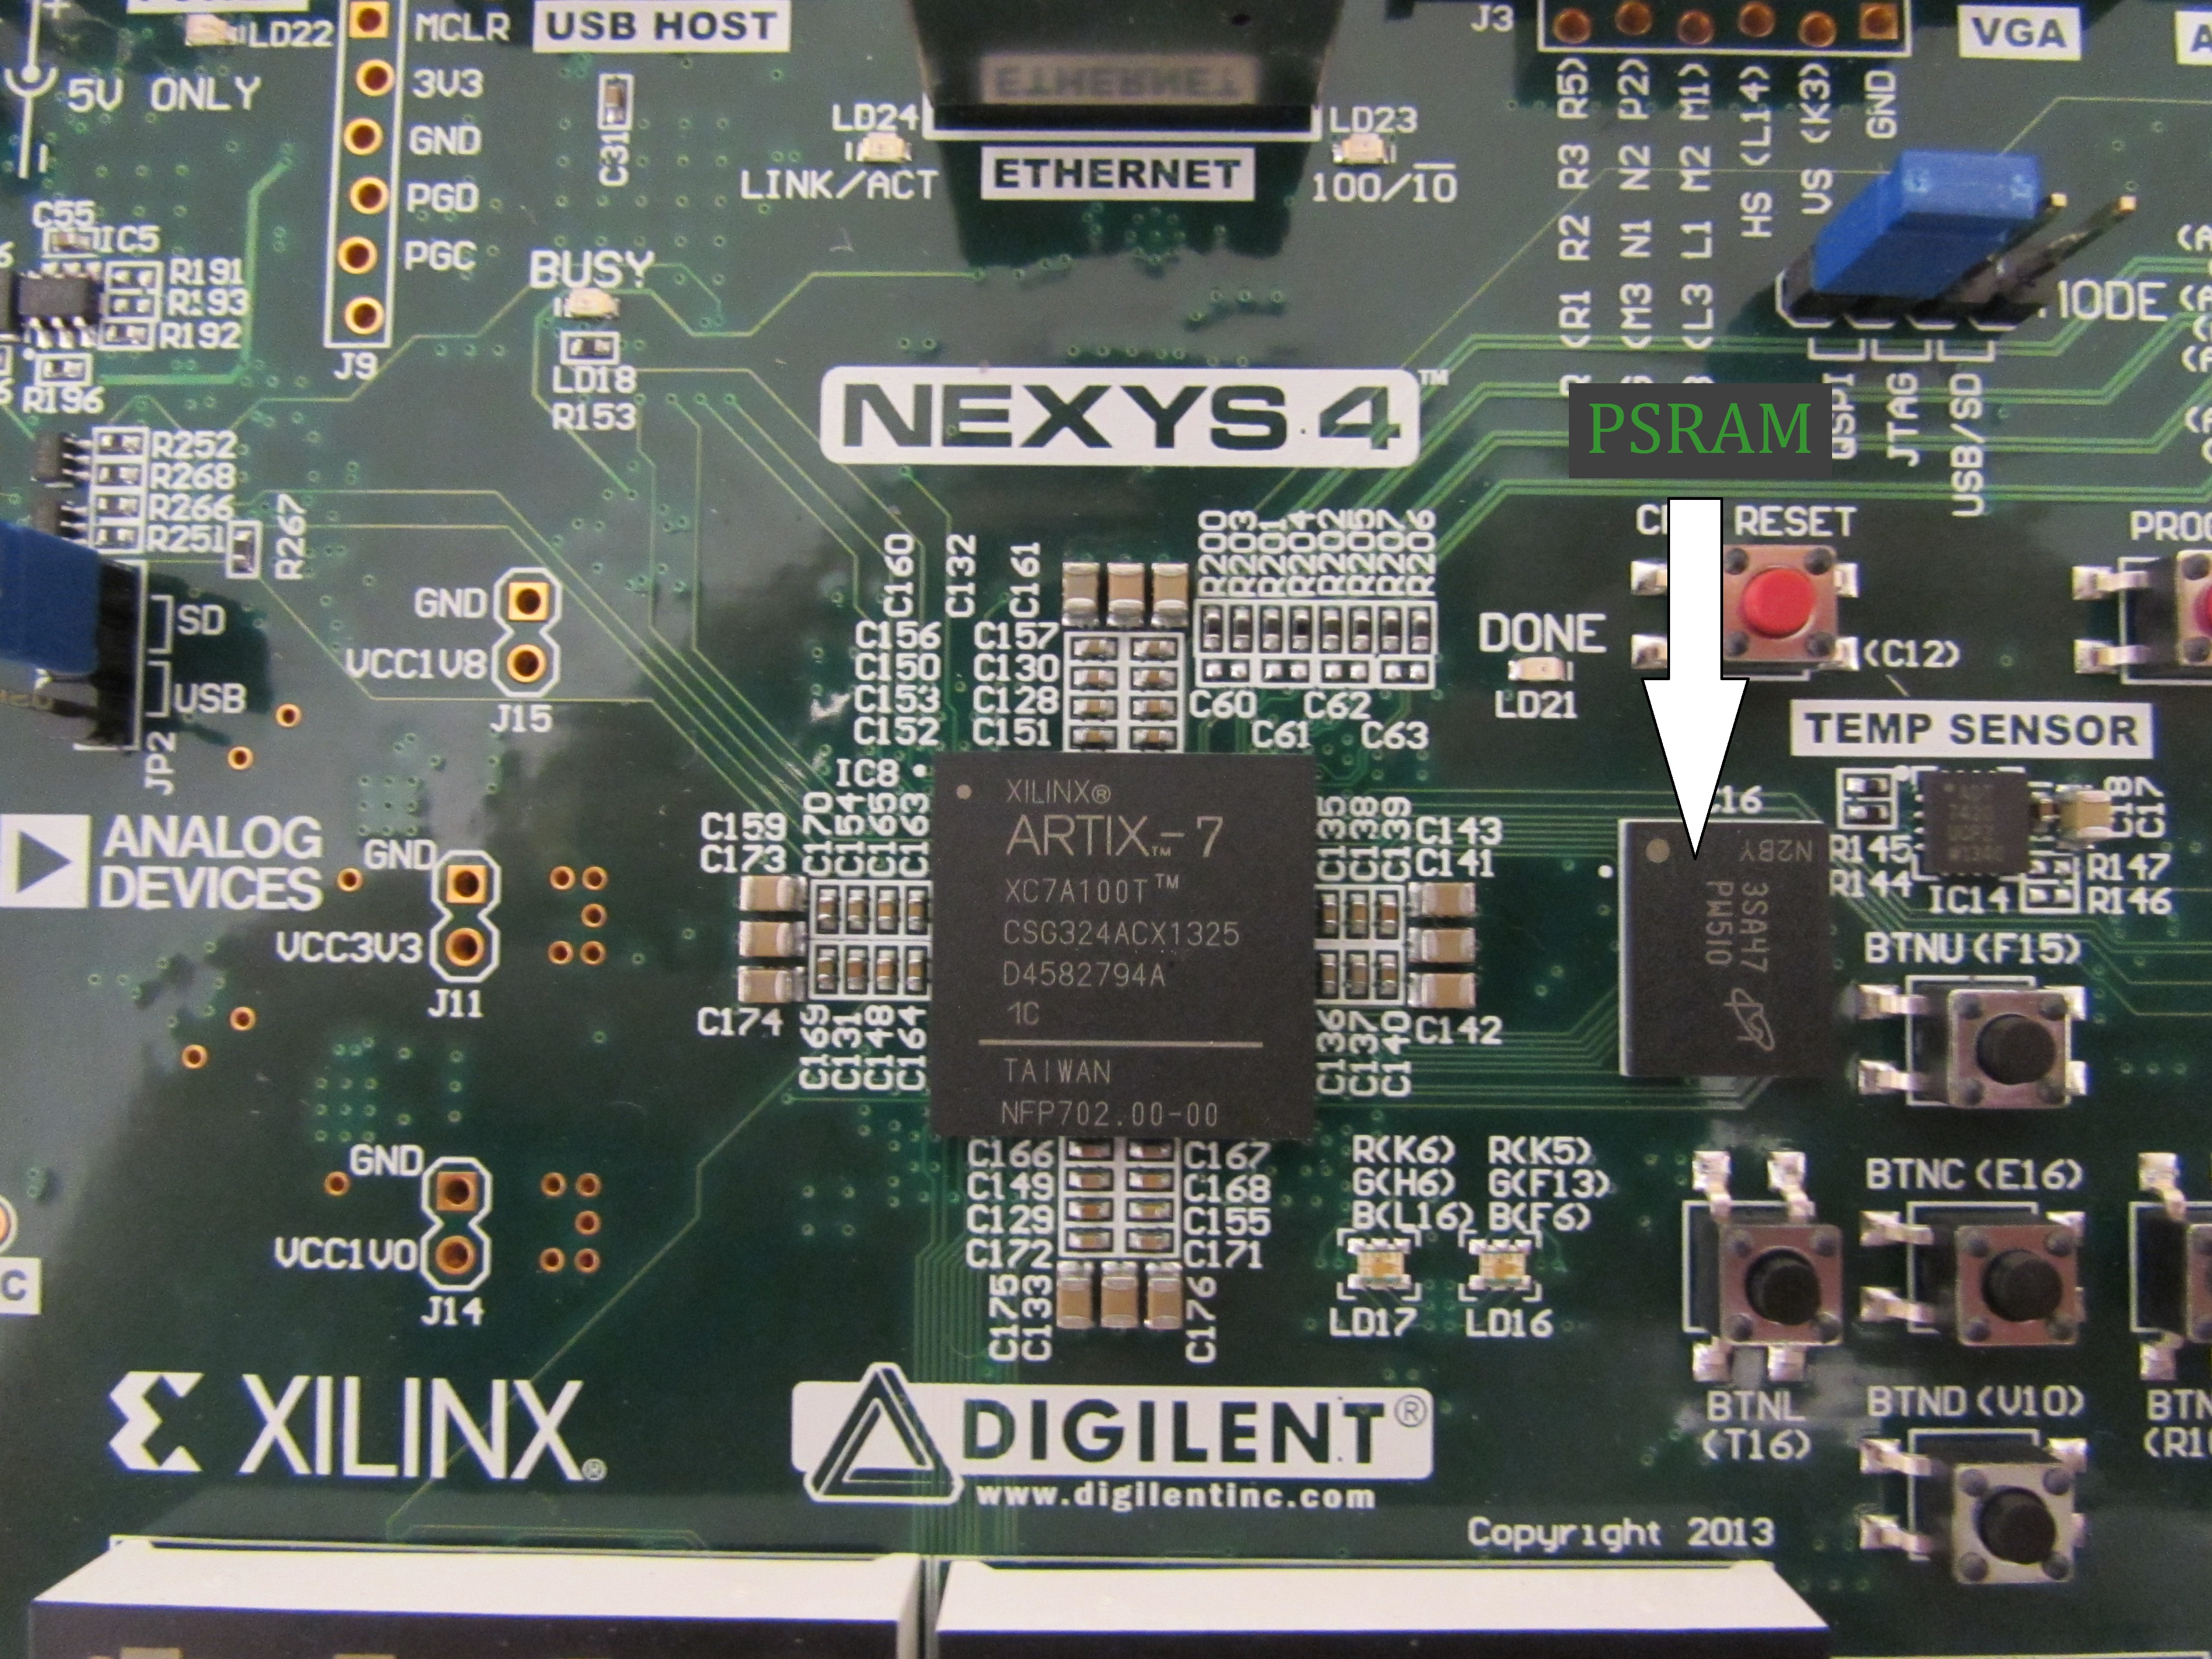 The CellularRAM chip on the Nexys 4